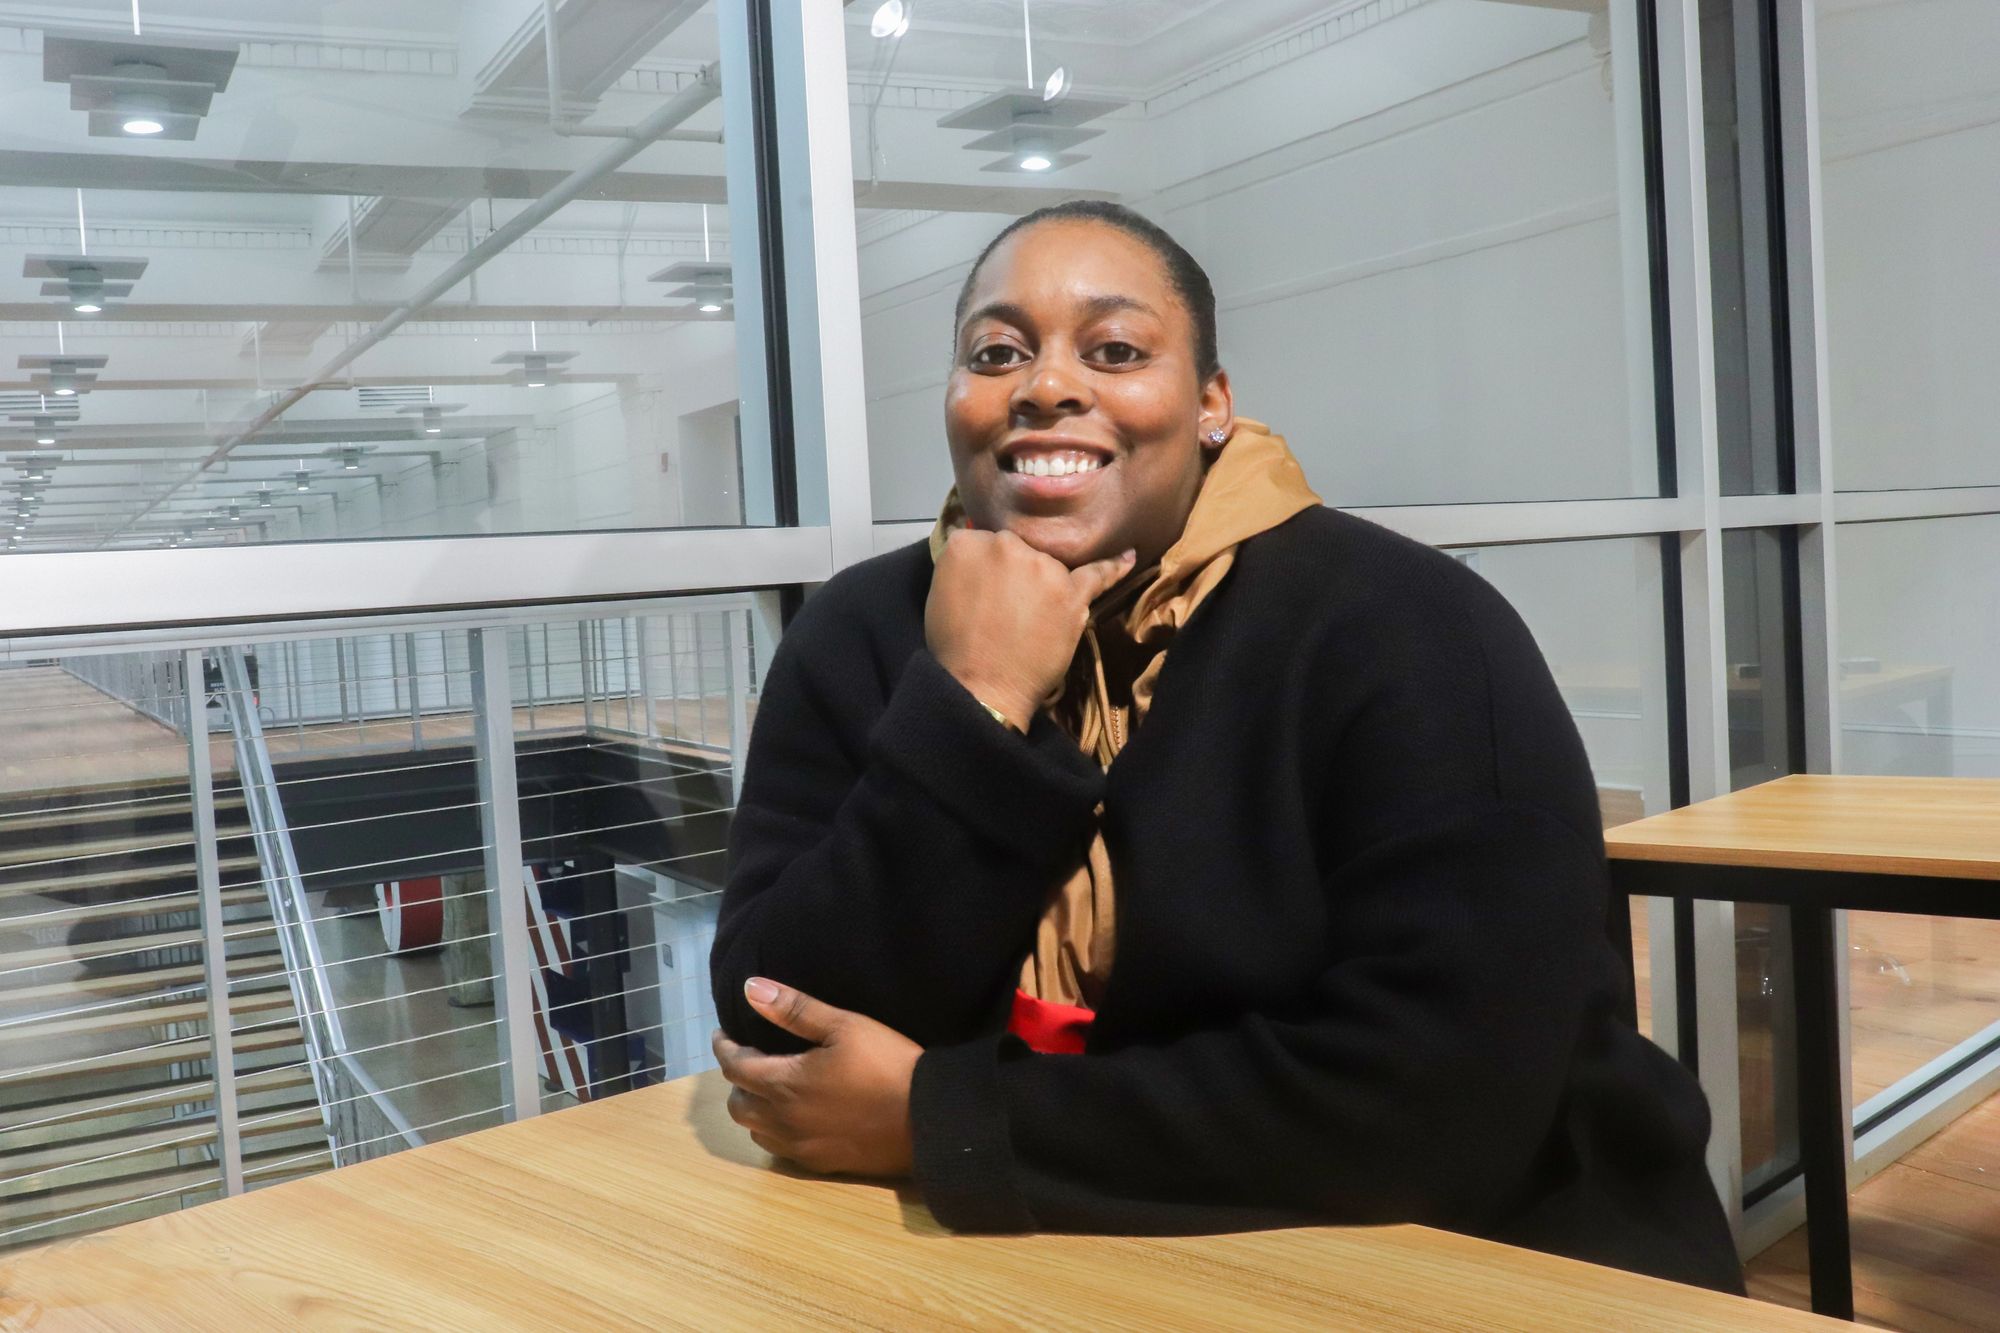 Meet The Woman Who Launched a $6 Million Wireless Network at 24 Years Old